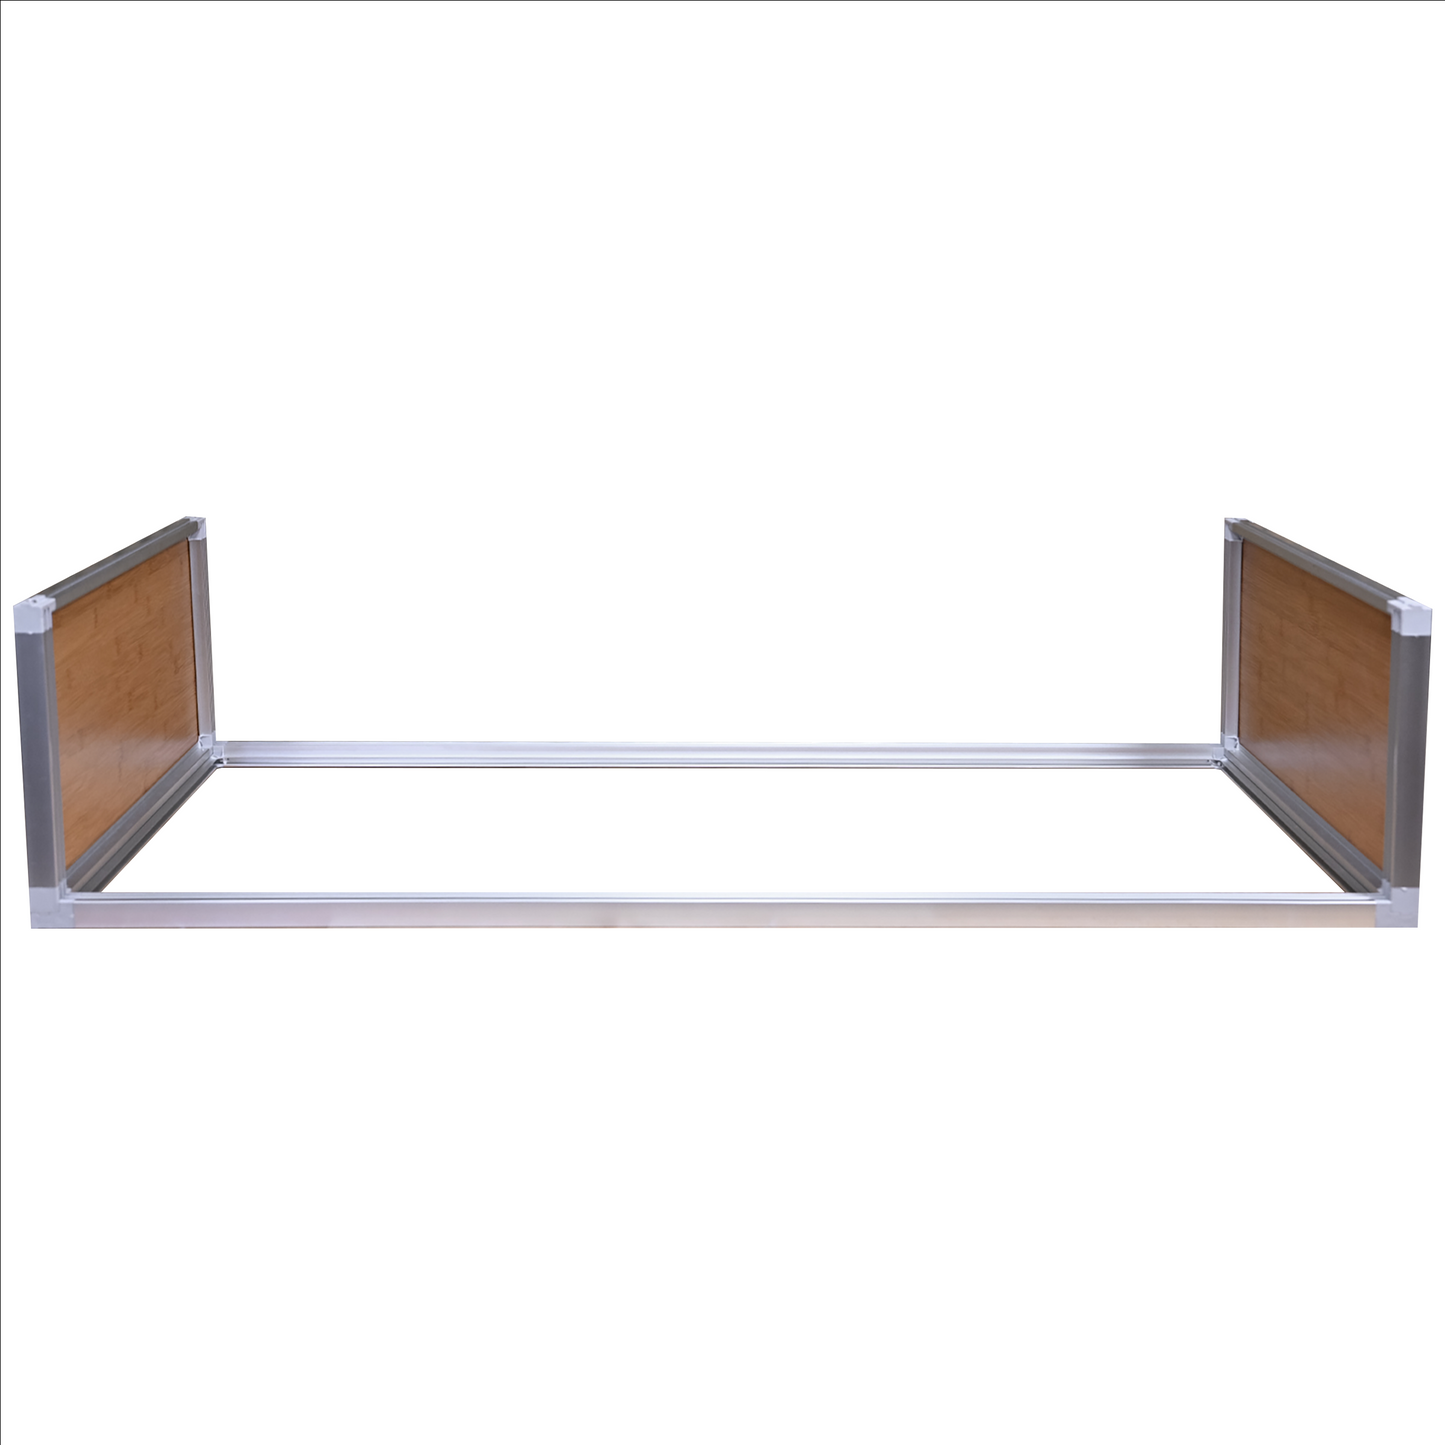 Meridian Deluxe Stacking Spacer – for 4’x2’ based Meridian enclosures